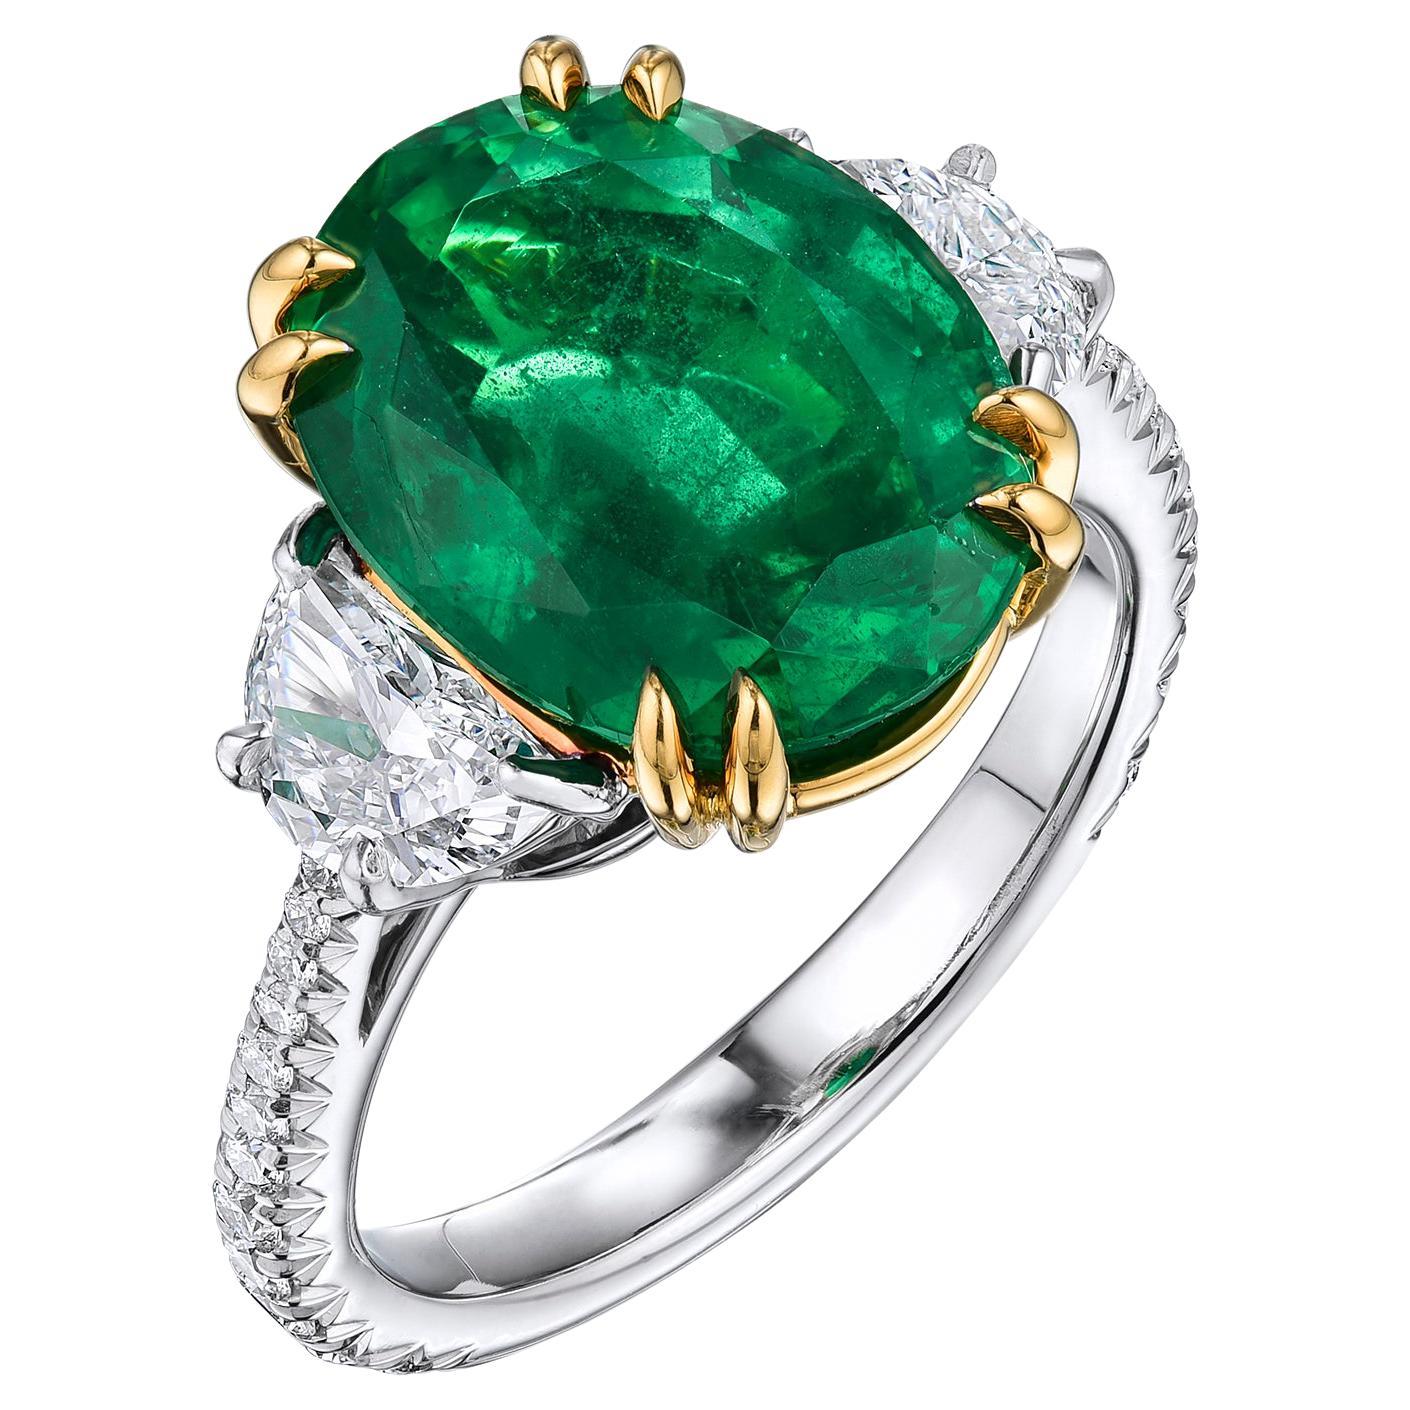 Oval 5.72 Ct Green Emerald Platinum Cocktail/Engagement Ring Set in Platinum For Sale